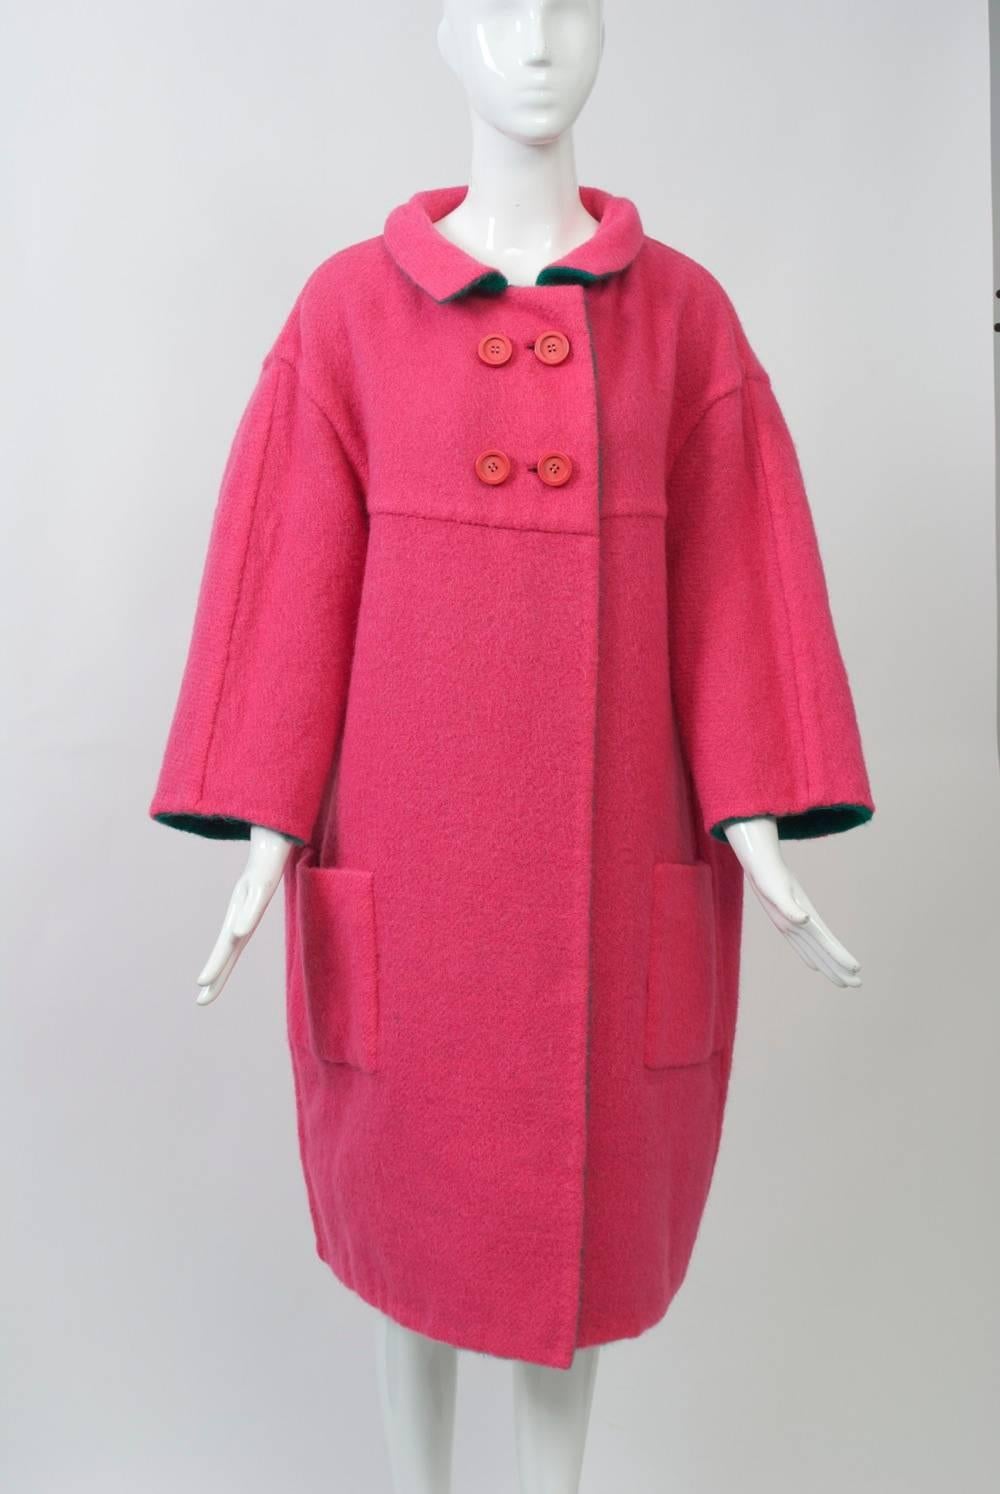 Unique 1960s cocoon-shaped mohair coat reverses from bright green to bright pink. The design features a welted yoke across dropped shoulders, back, and bust, above which are matching double-breasted buttons. Patch pockets, a small collar, and wide,